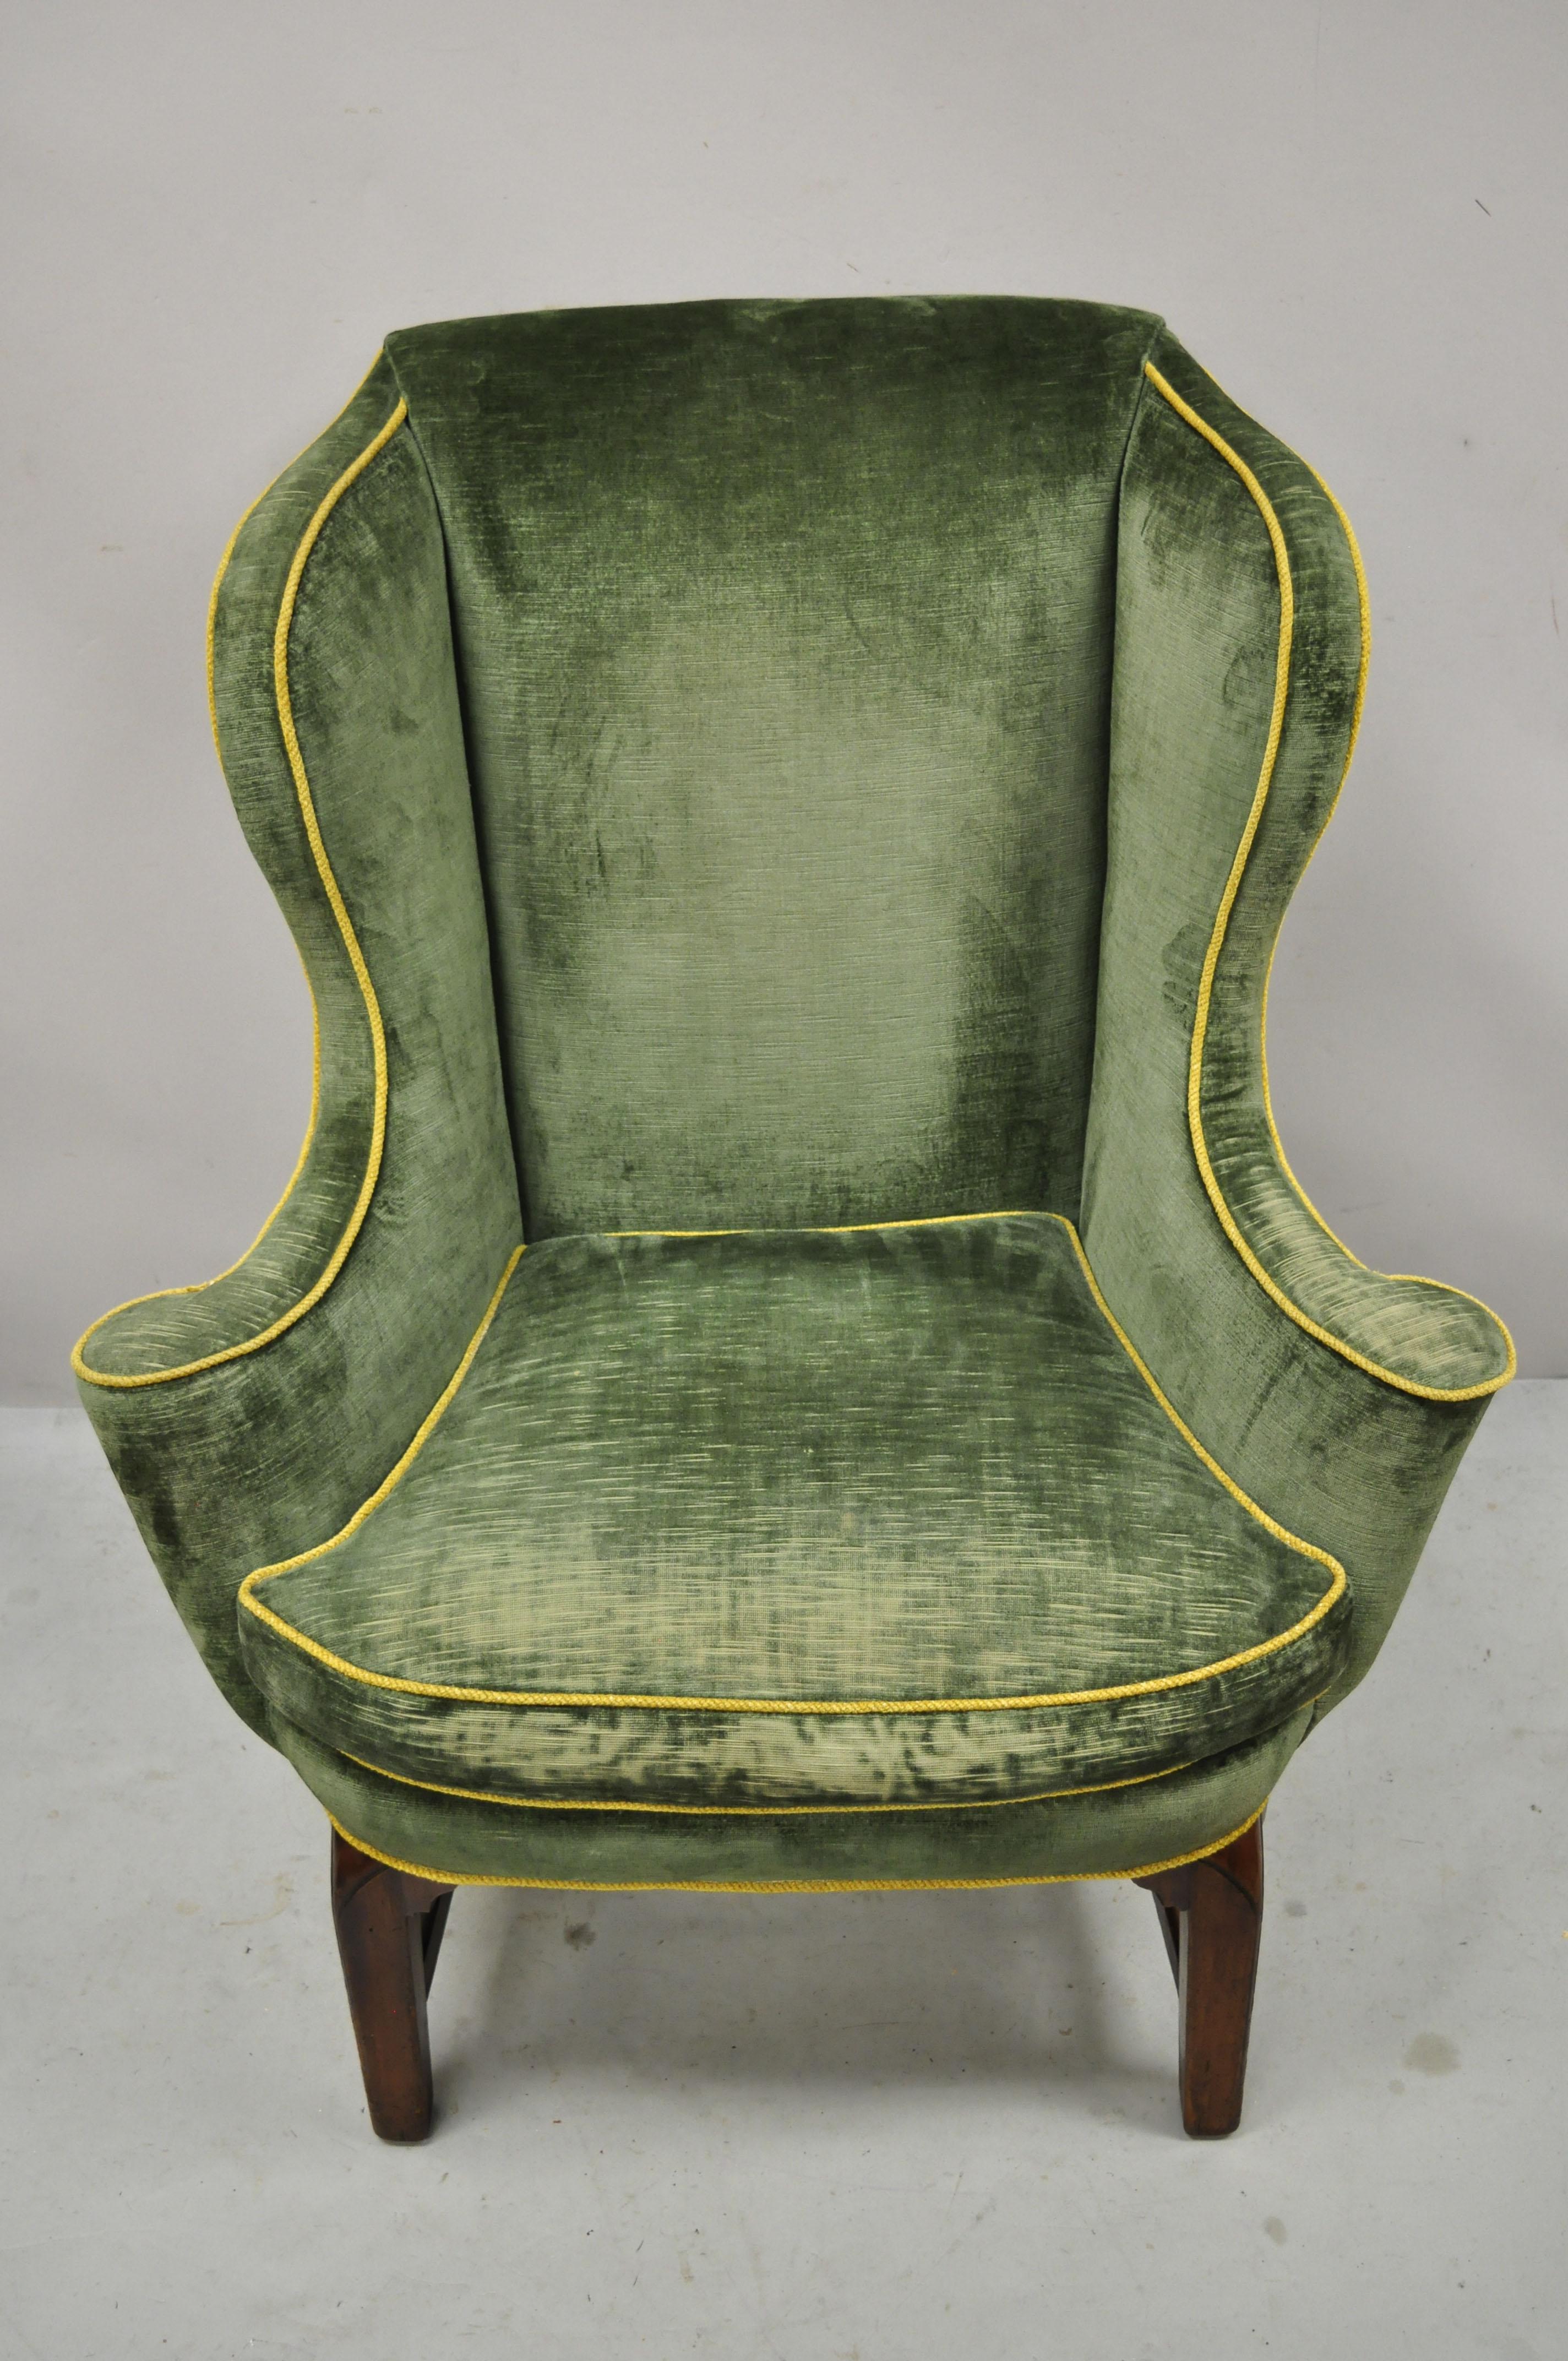 Antique English Chippendale Georgian Mahogany green mohair wingback lounge chair. Item features nice mid-size mahogany frame, green mohair fabric, stretcher base, shapely rolled arms, solid wood frame, very nice antique item, great style and form.